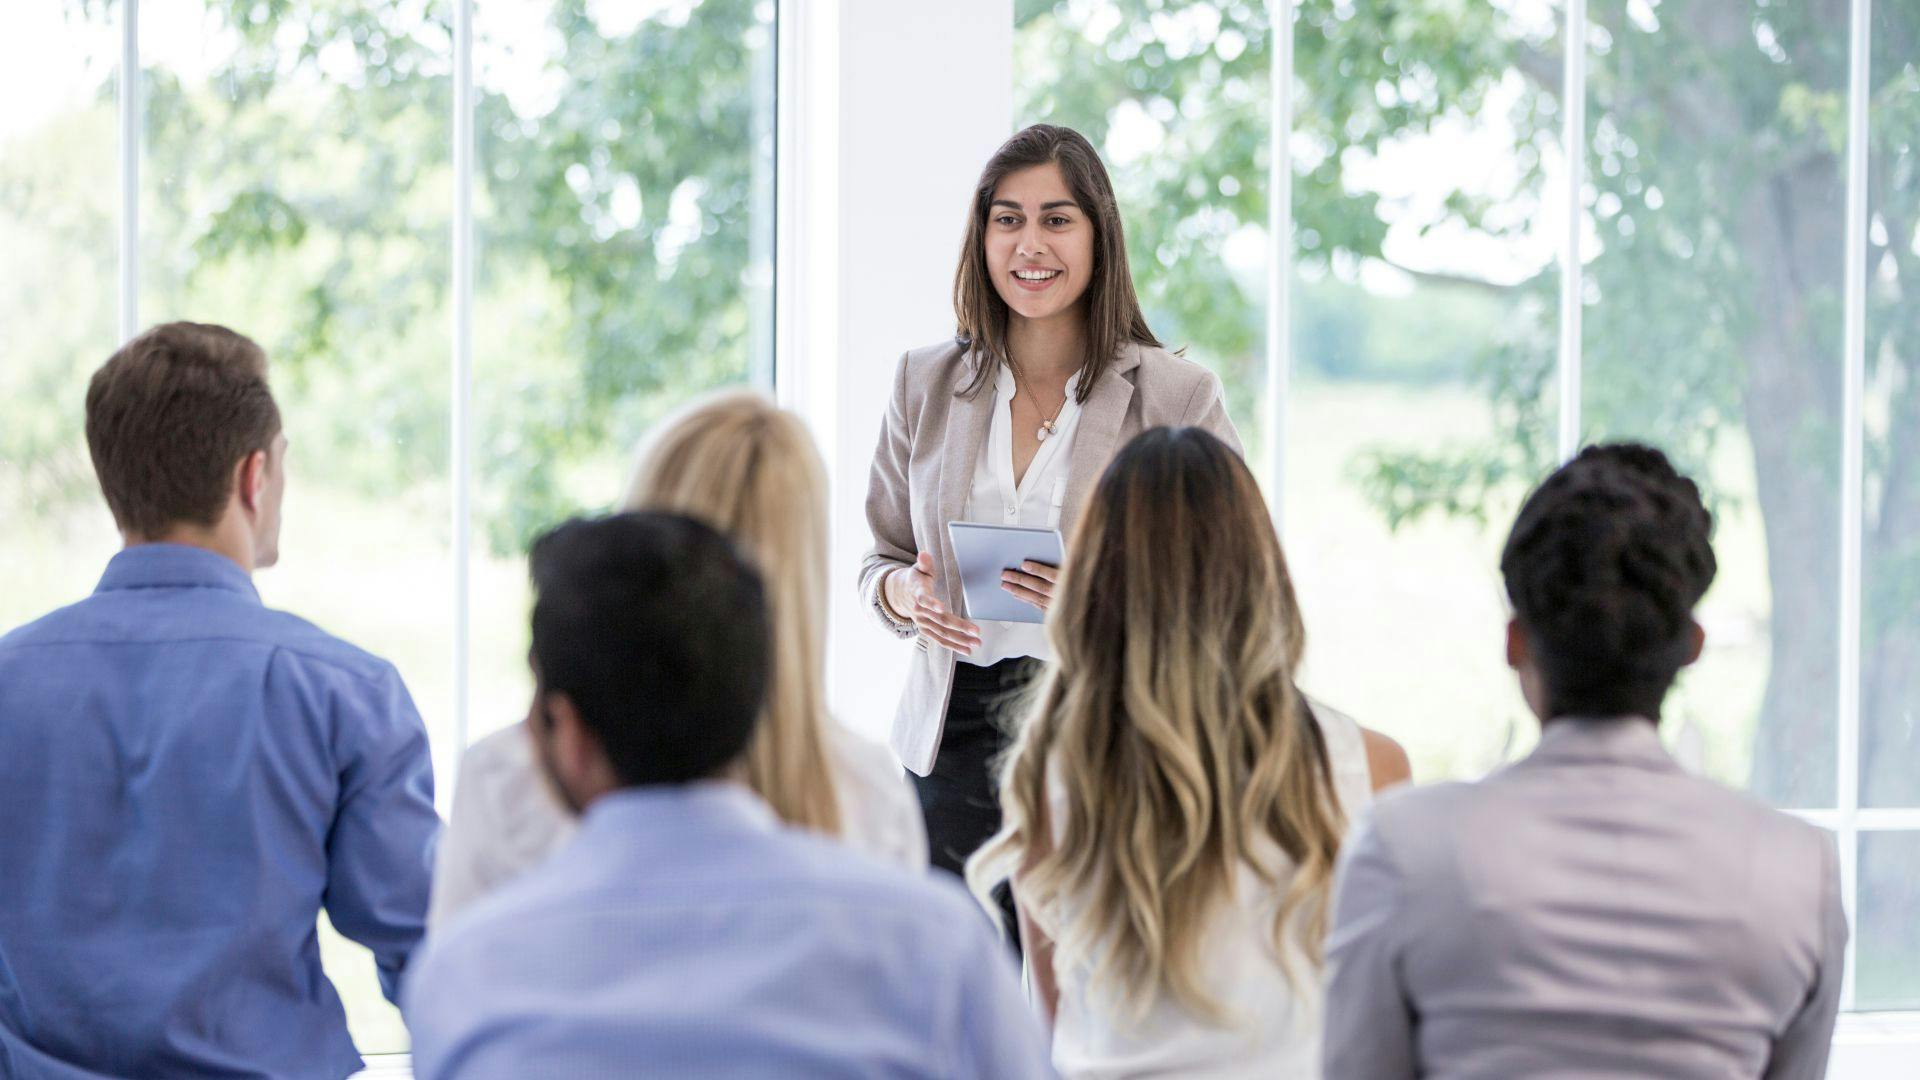 A woman confidently presenting to a group of attentive individuals during a professional meeting.